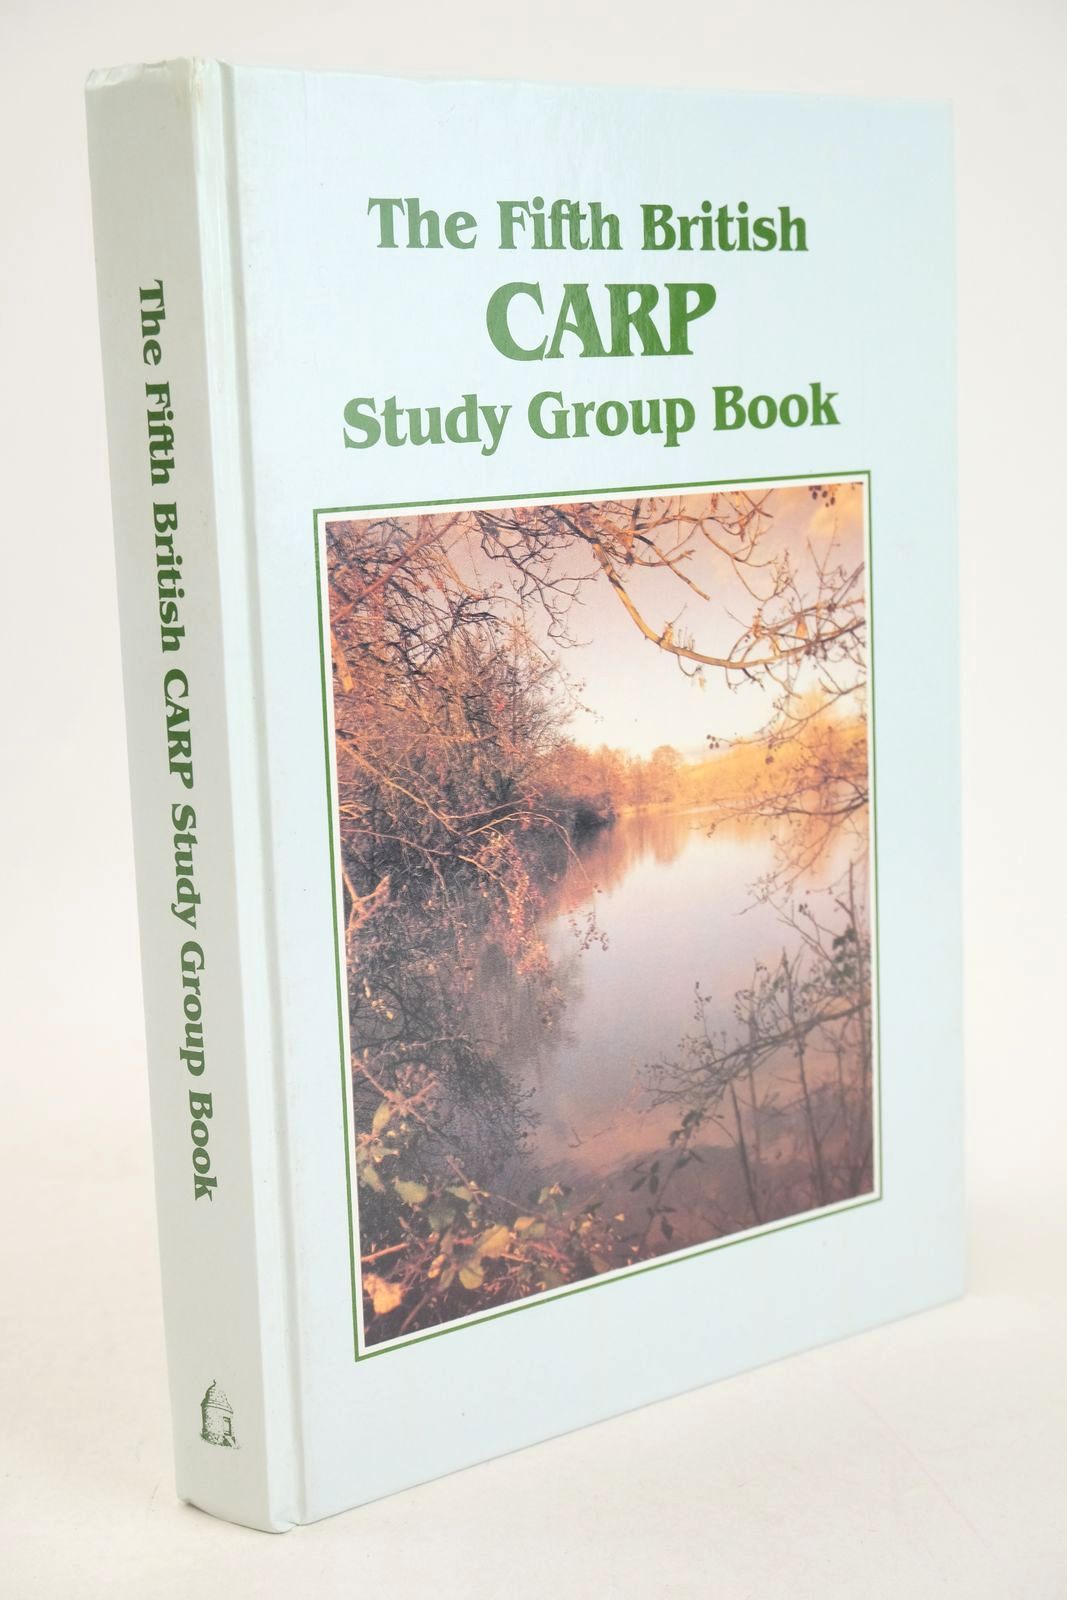 Photo of THE FIFTH BRITISH CARP STUDY GROUP BOOK written by Welland, Alec illustrated by Gurd, Len published by British Carp Study Group (STOCK CODE: 1327604)  for sale by Stella & Rose's Books